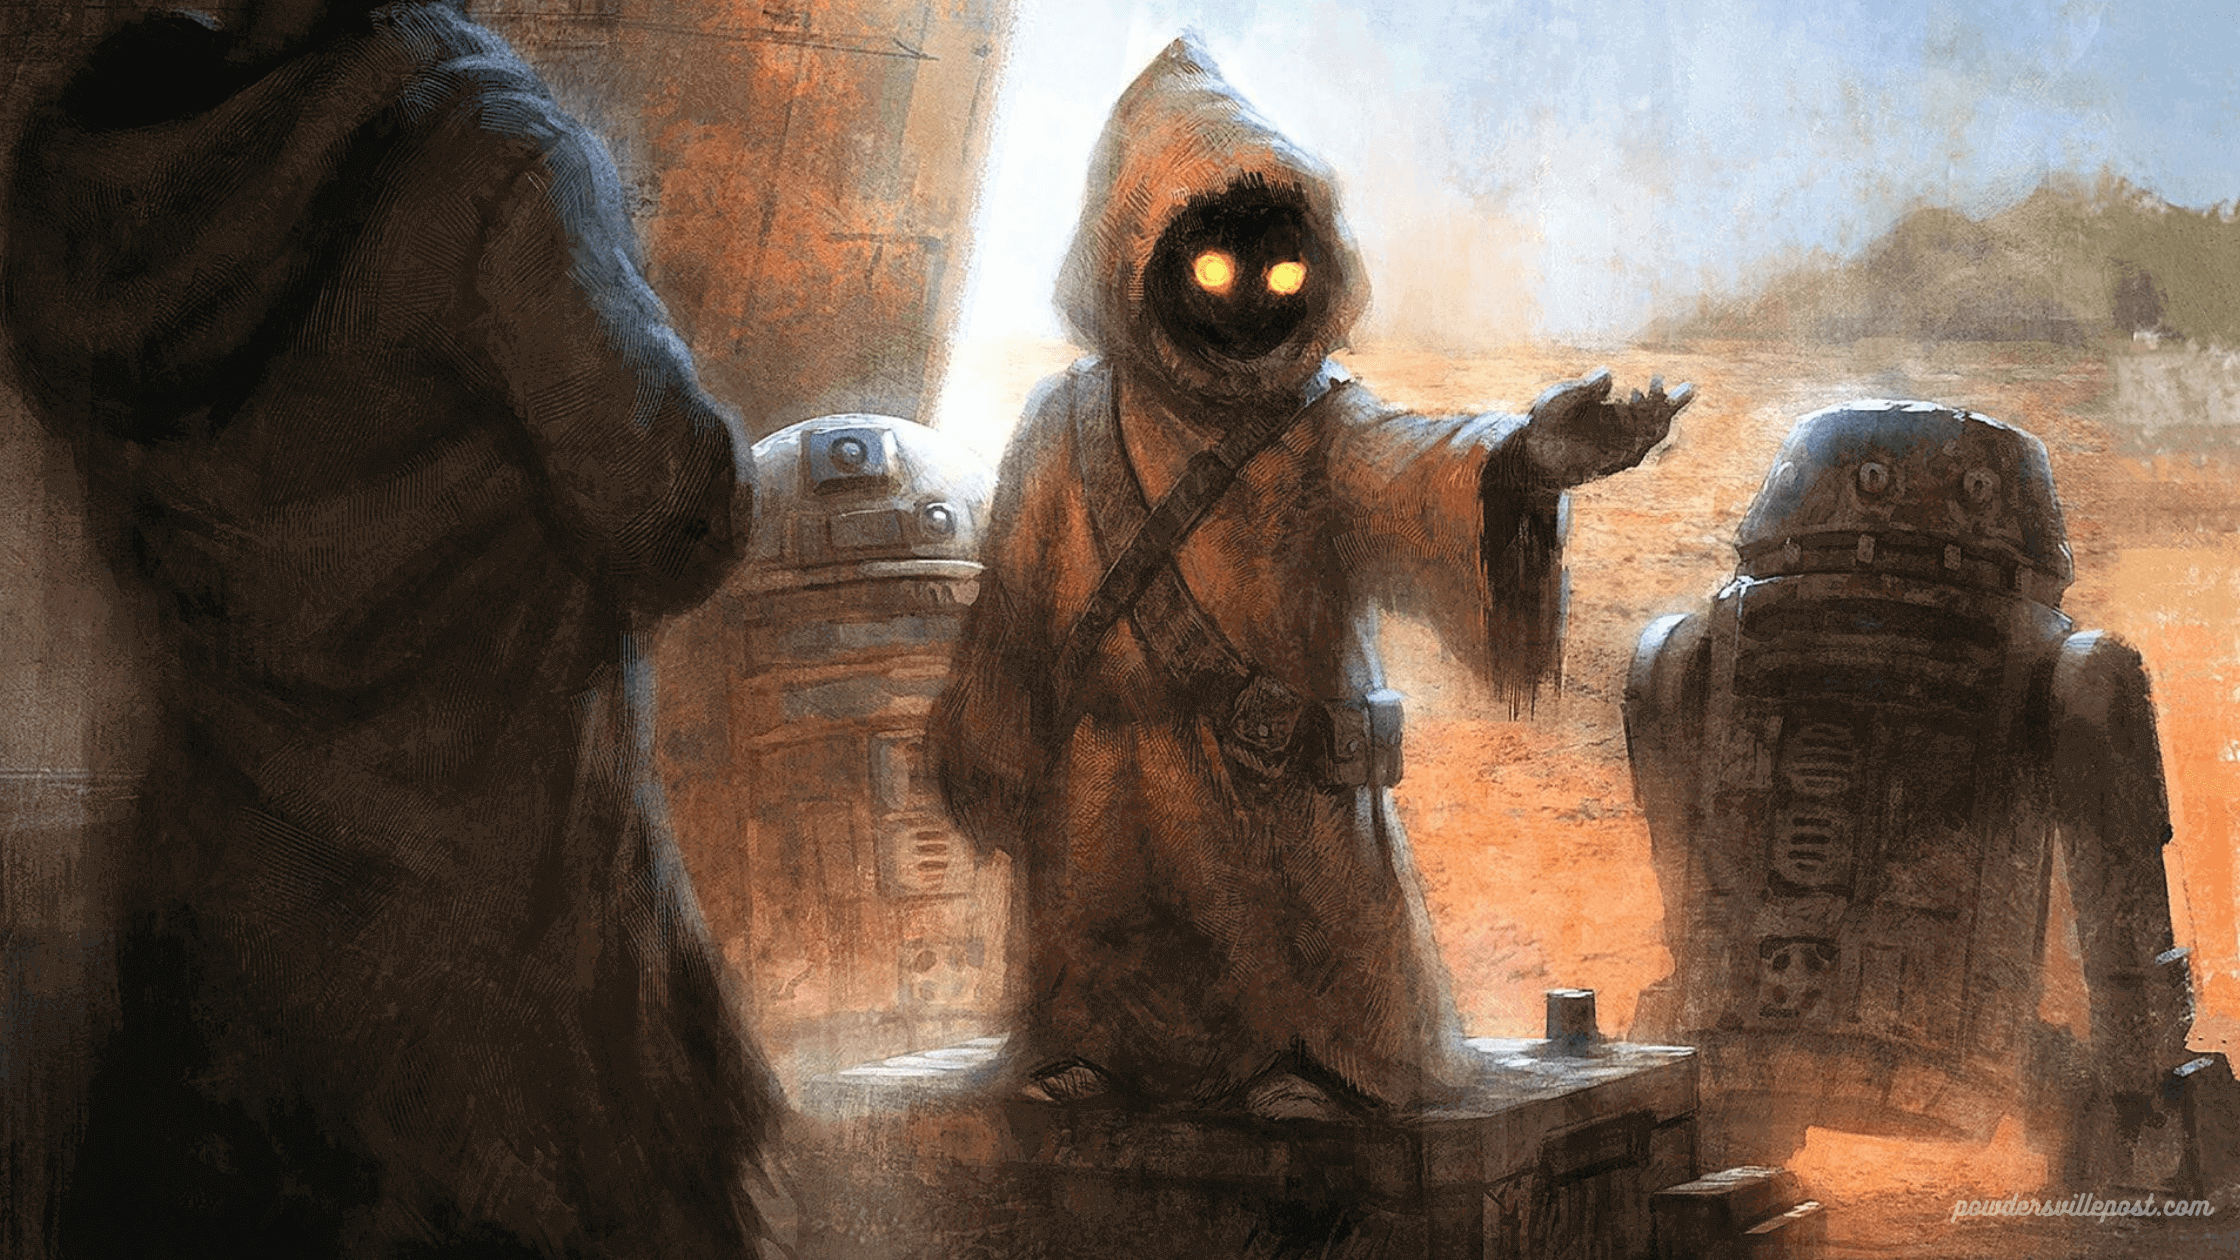 What Does A Jawa Look Like When He Isn’t Wearing His Hood